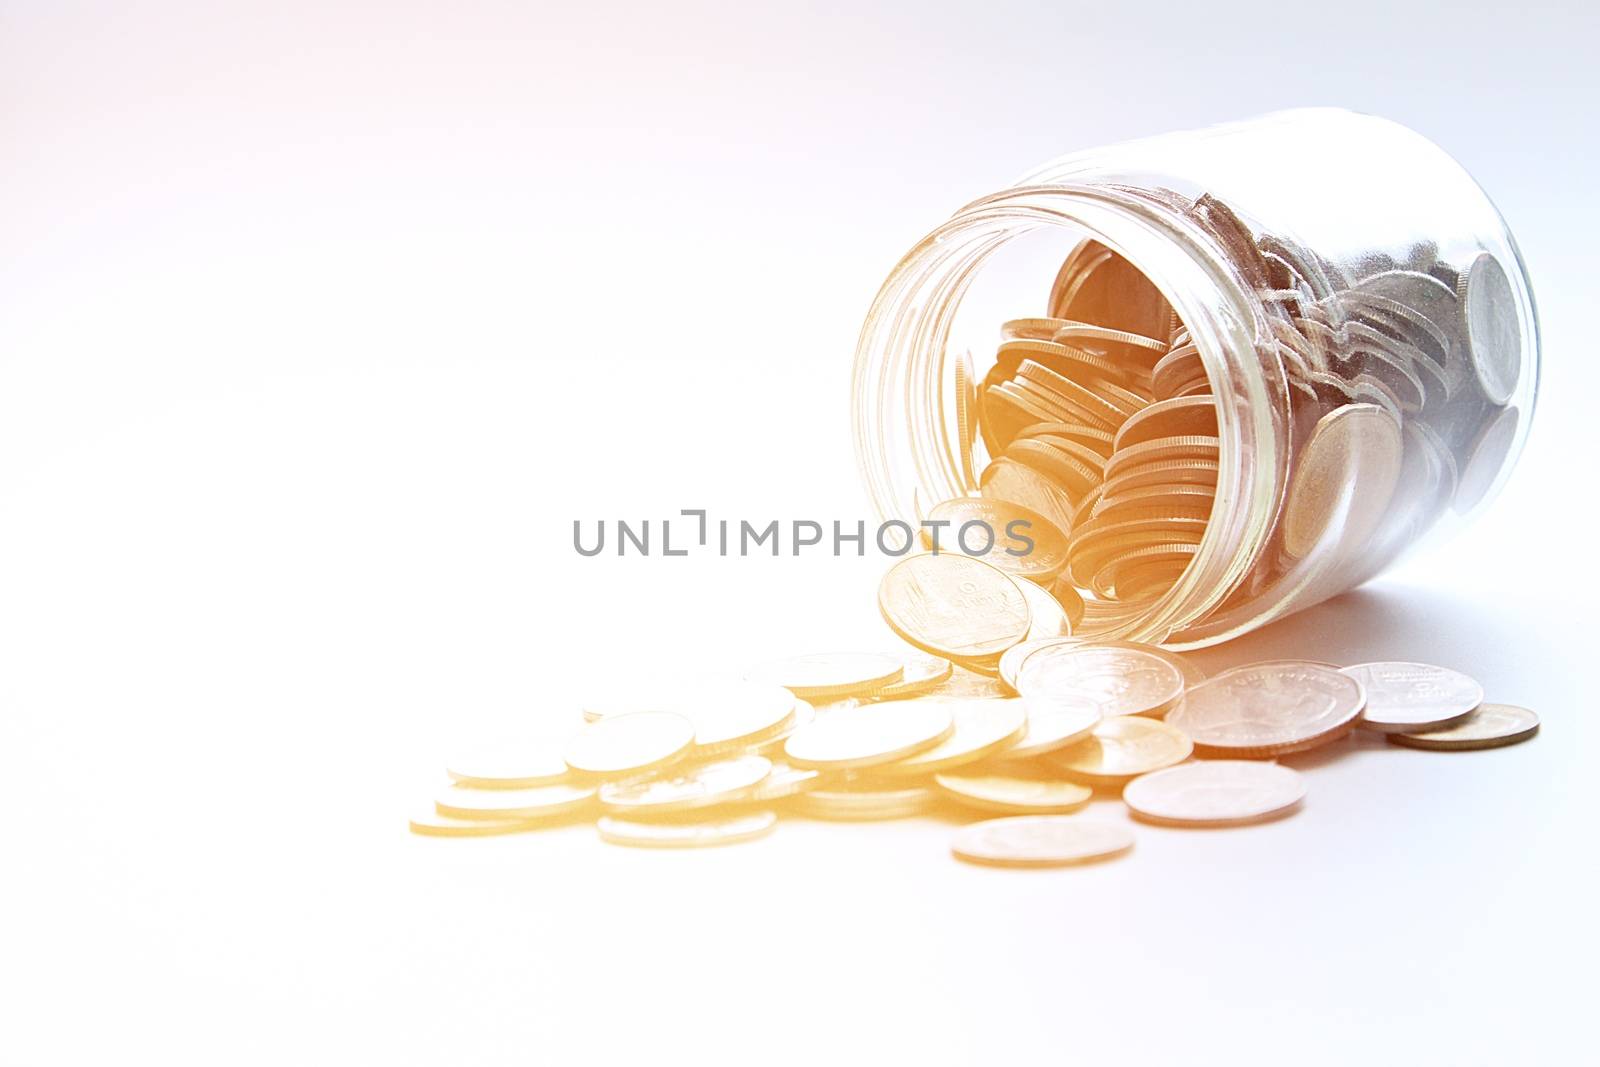 Business, finance, saving money or investment concept : Coins scattered from glass jar on white background